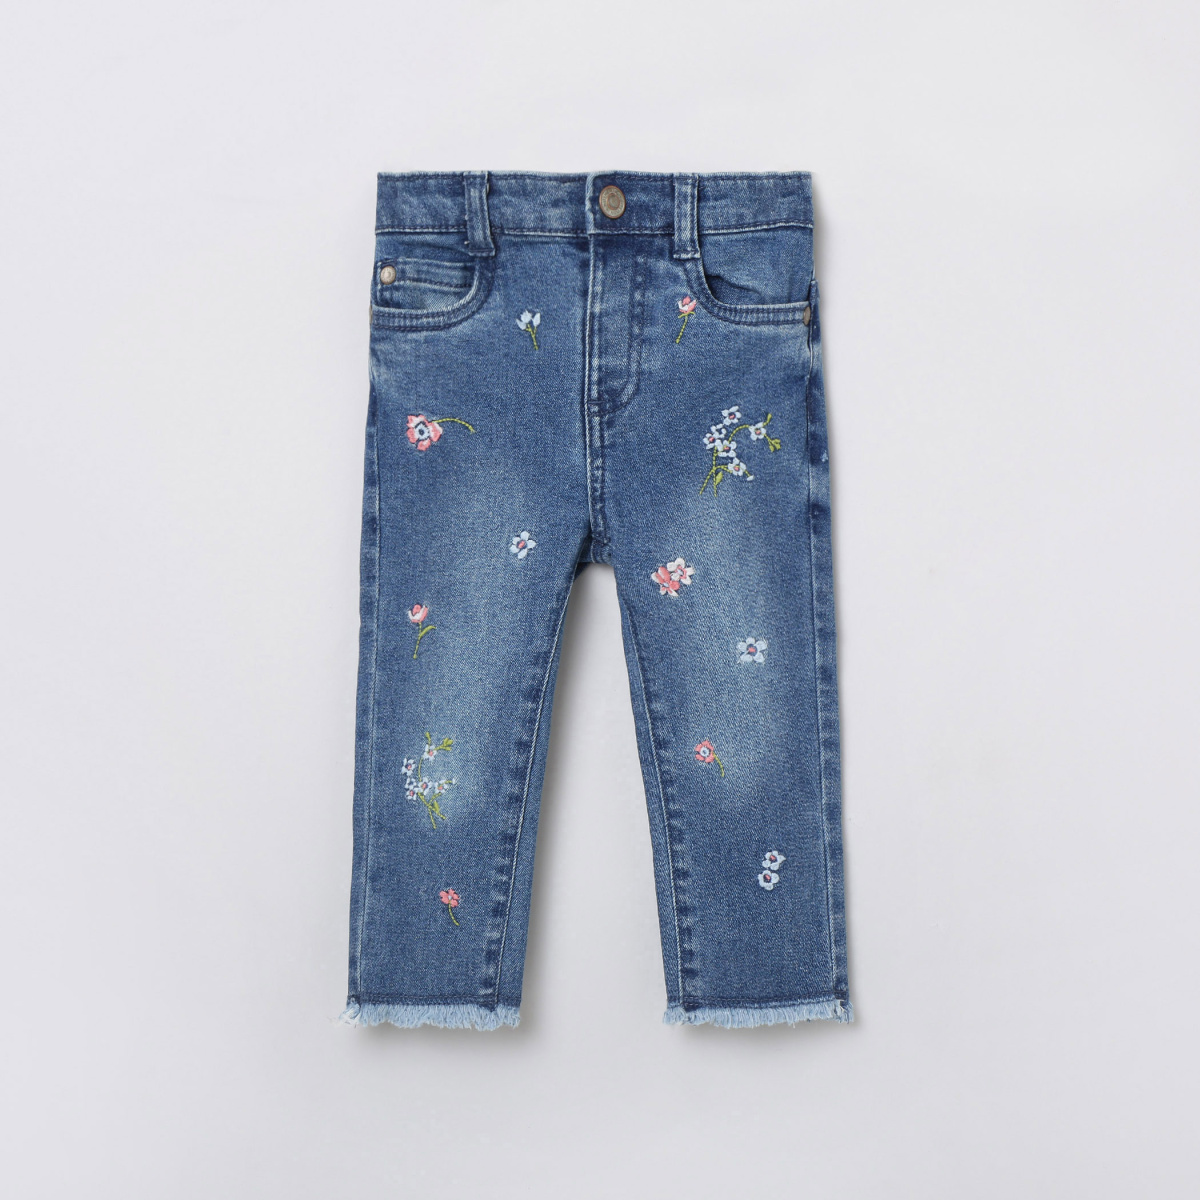 MAX Embroidered Slim Fit Jeans